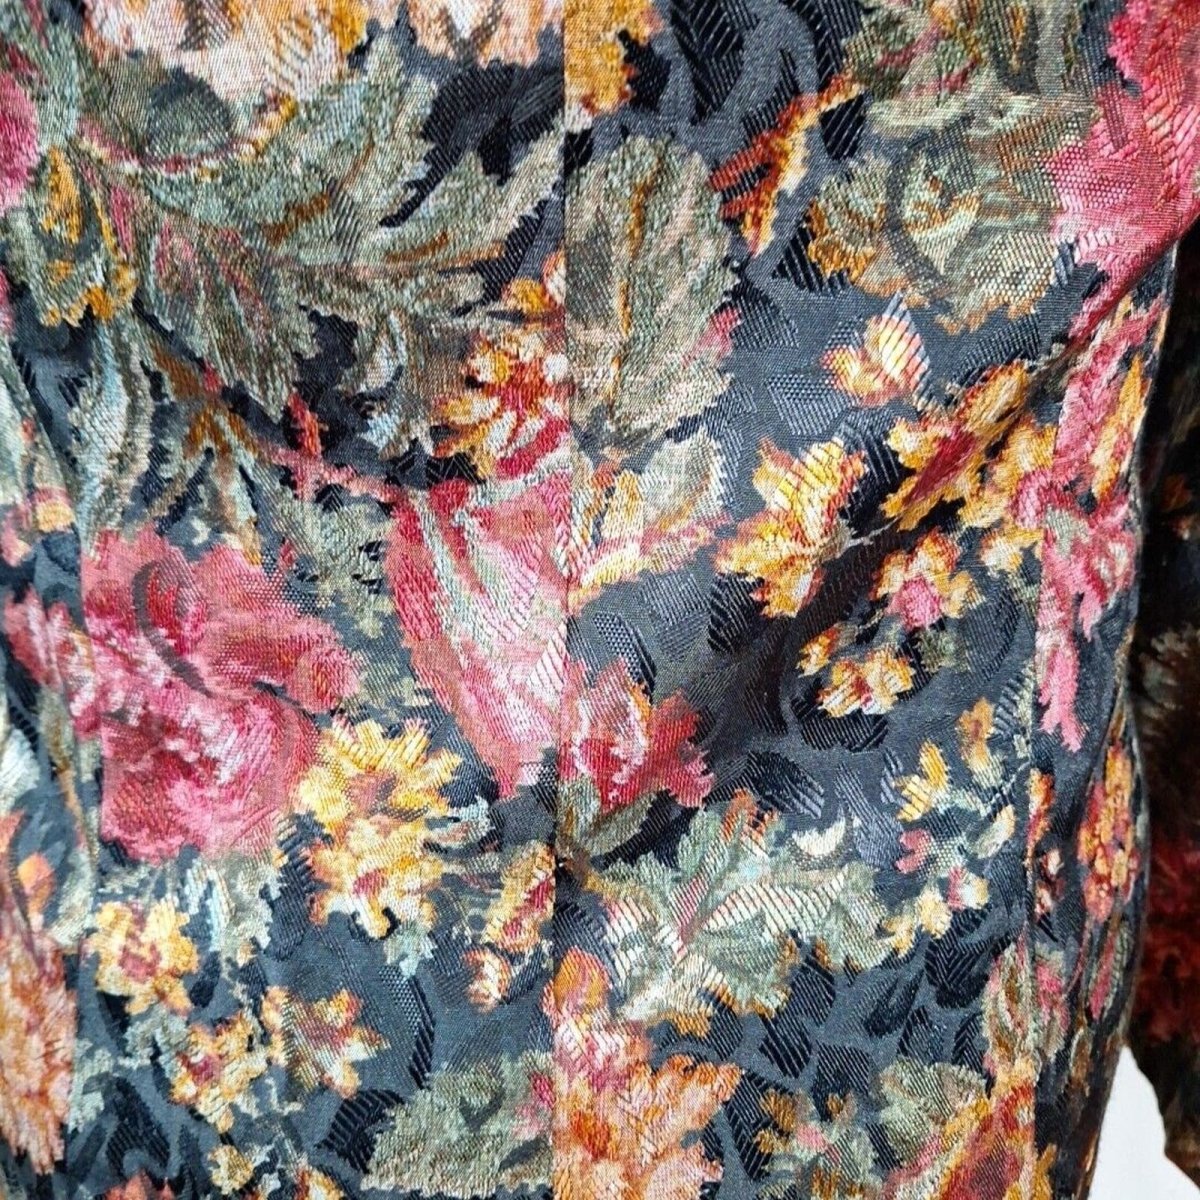 Vintage 80s/90s Hip Length Floral Double Breasted Blazer Women Size Large - themallvintage The Mall Vintage